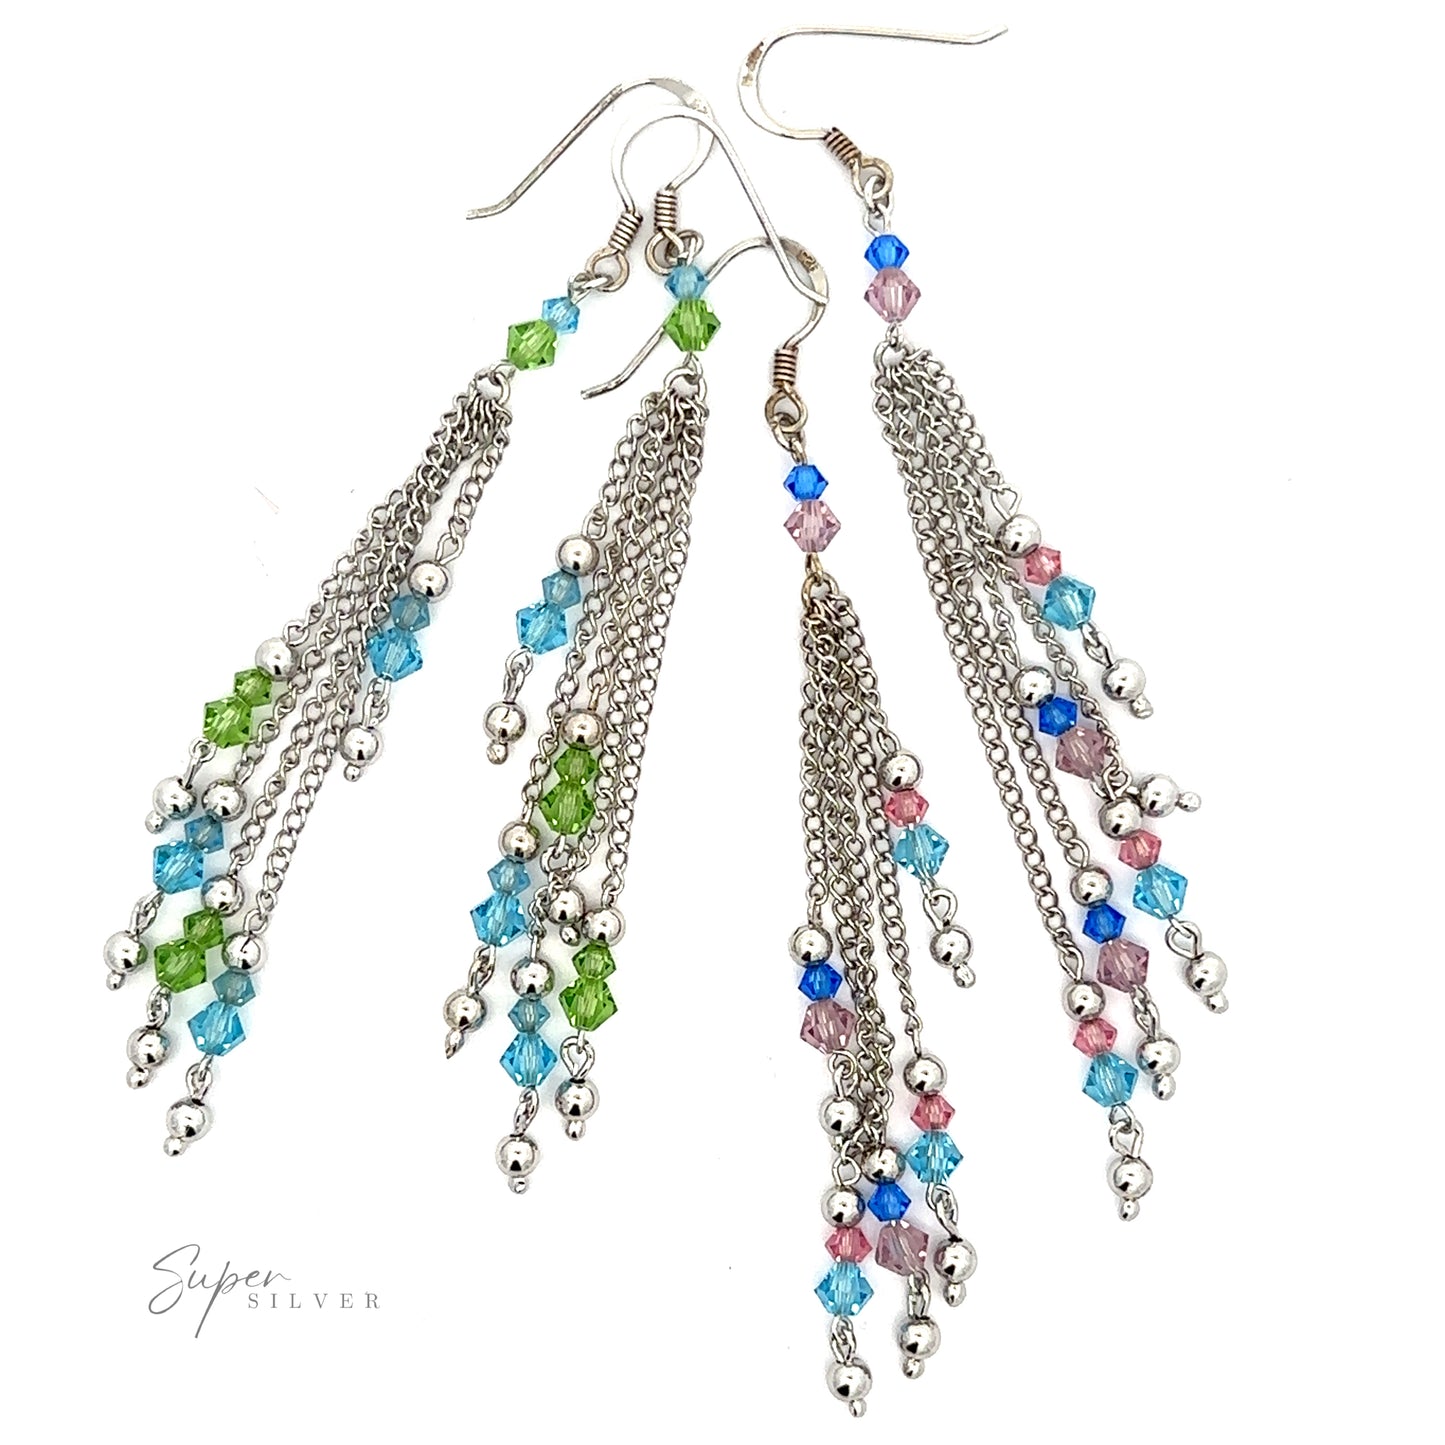 
                  
                    Four Layered Earrings with Multicolored Beads with multiple sterling silver chains and rhodium-plated, multicolored beads in blue, green, and pink. The chains end with small silver balls. Brand name "Super Silver" visible in the bottom left corner.
                  
                